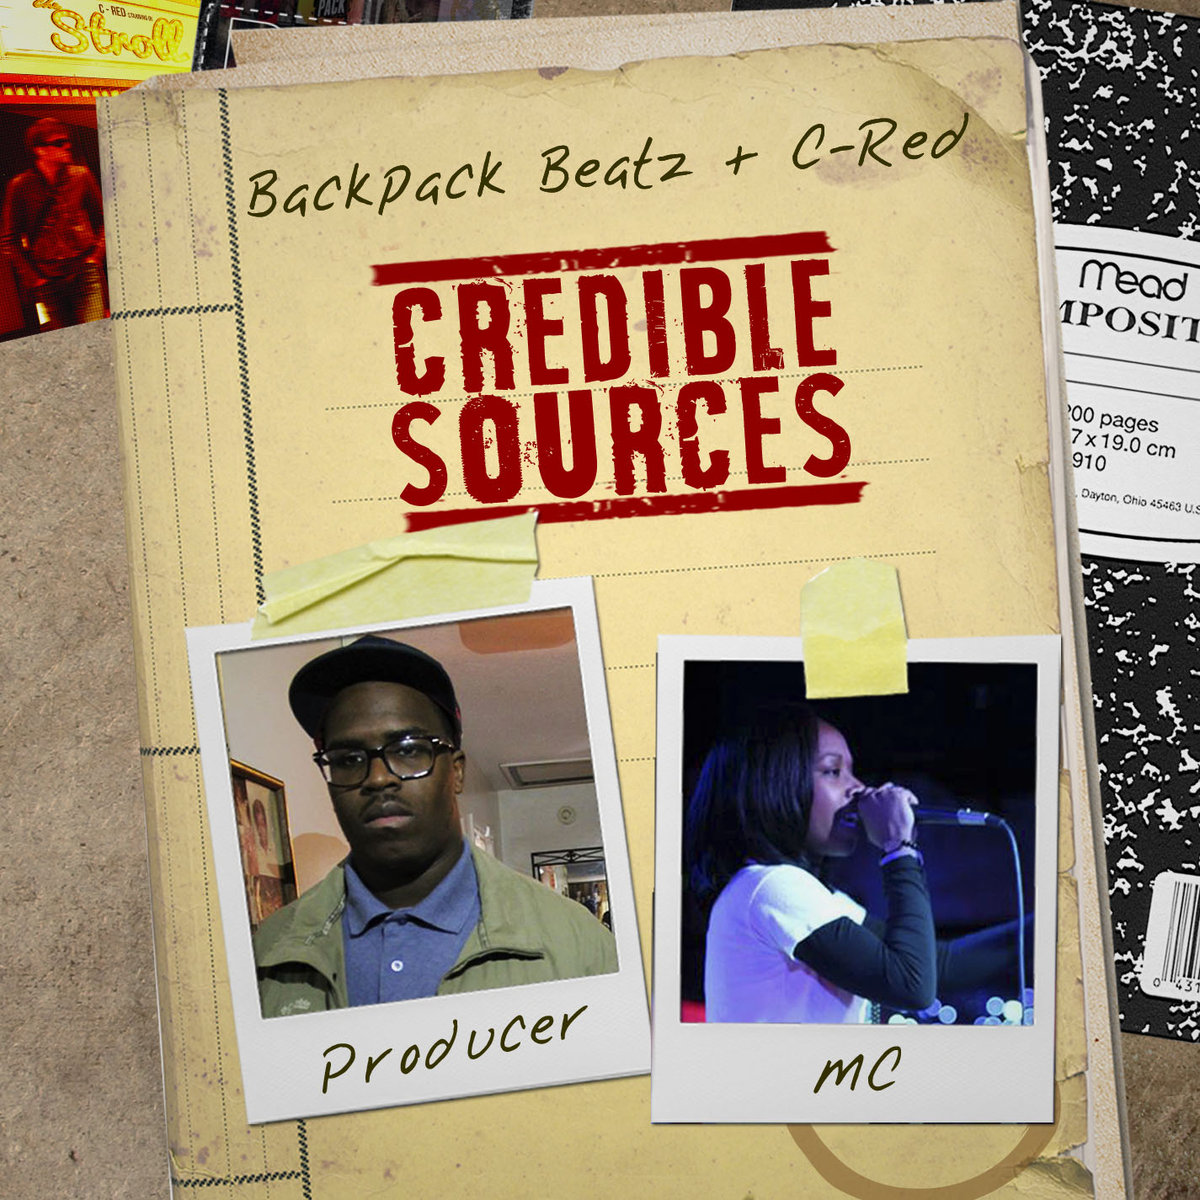 Backpack C-Red Credible Sources Album Art